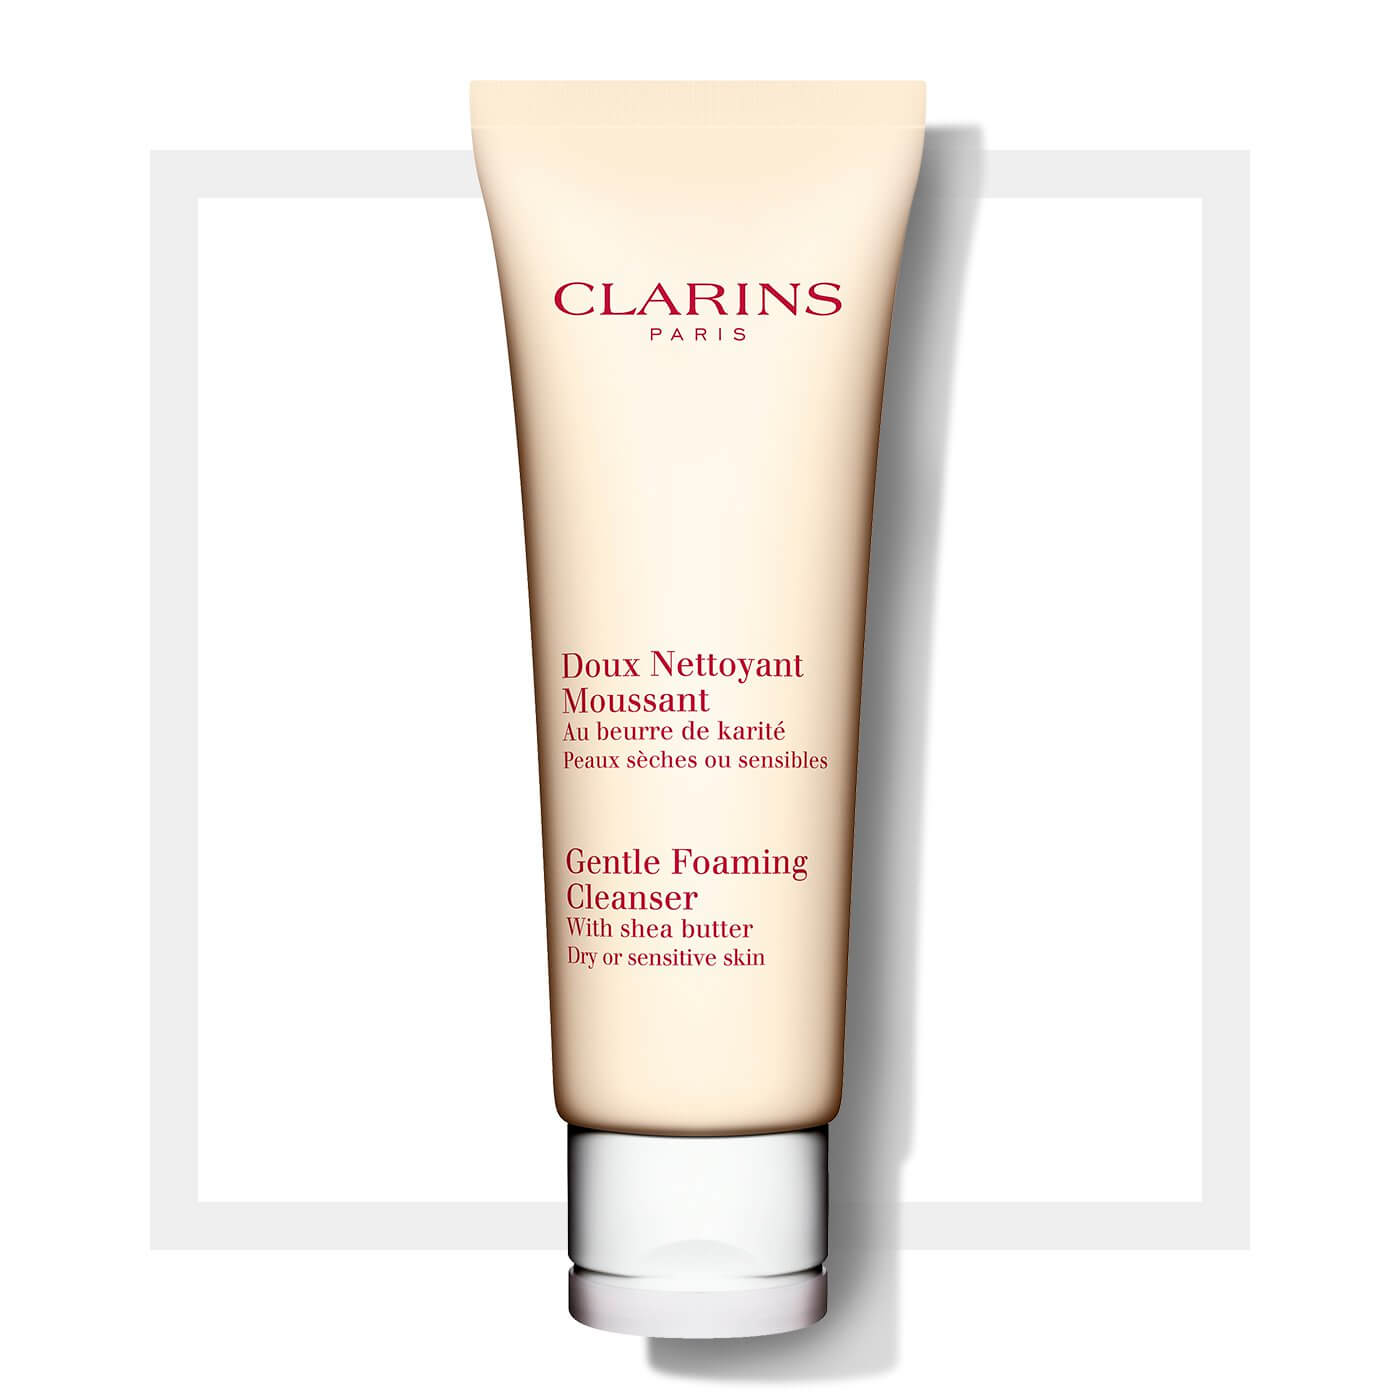 Clarins,Clarins Gentle Foaming Cleanser With Shea Butter for Dry or Sensitive Skin,Clarins Gentle Foaming Cleanser,โฟมสำหรับผิวแห้ง,โฟมสำหรับผิวแห้ง แพ้ง่าย,โฟม ผิวแพ้ง่าย,ผิวแพ้ง่ายใช้โฟมอะไรดี